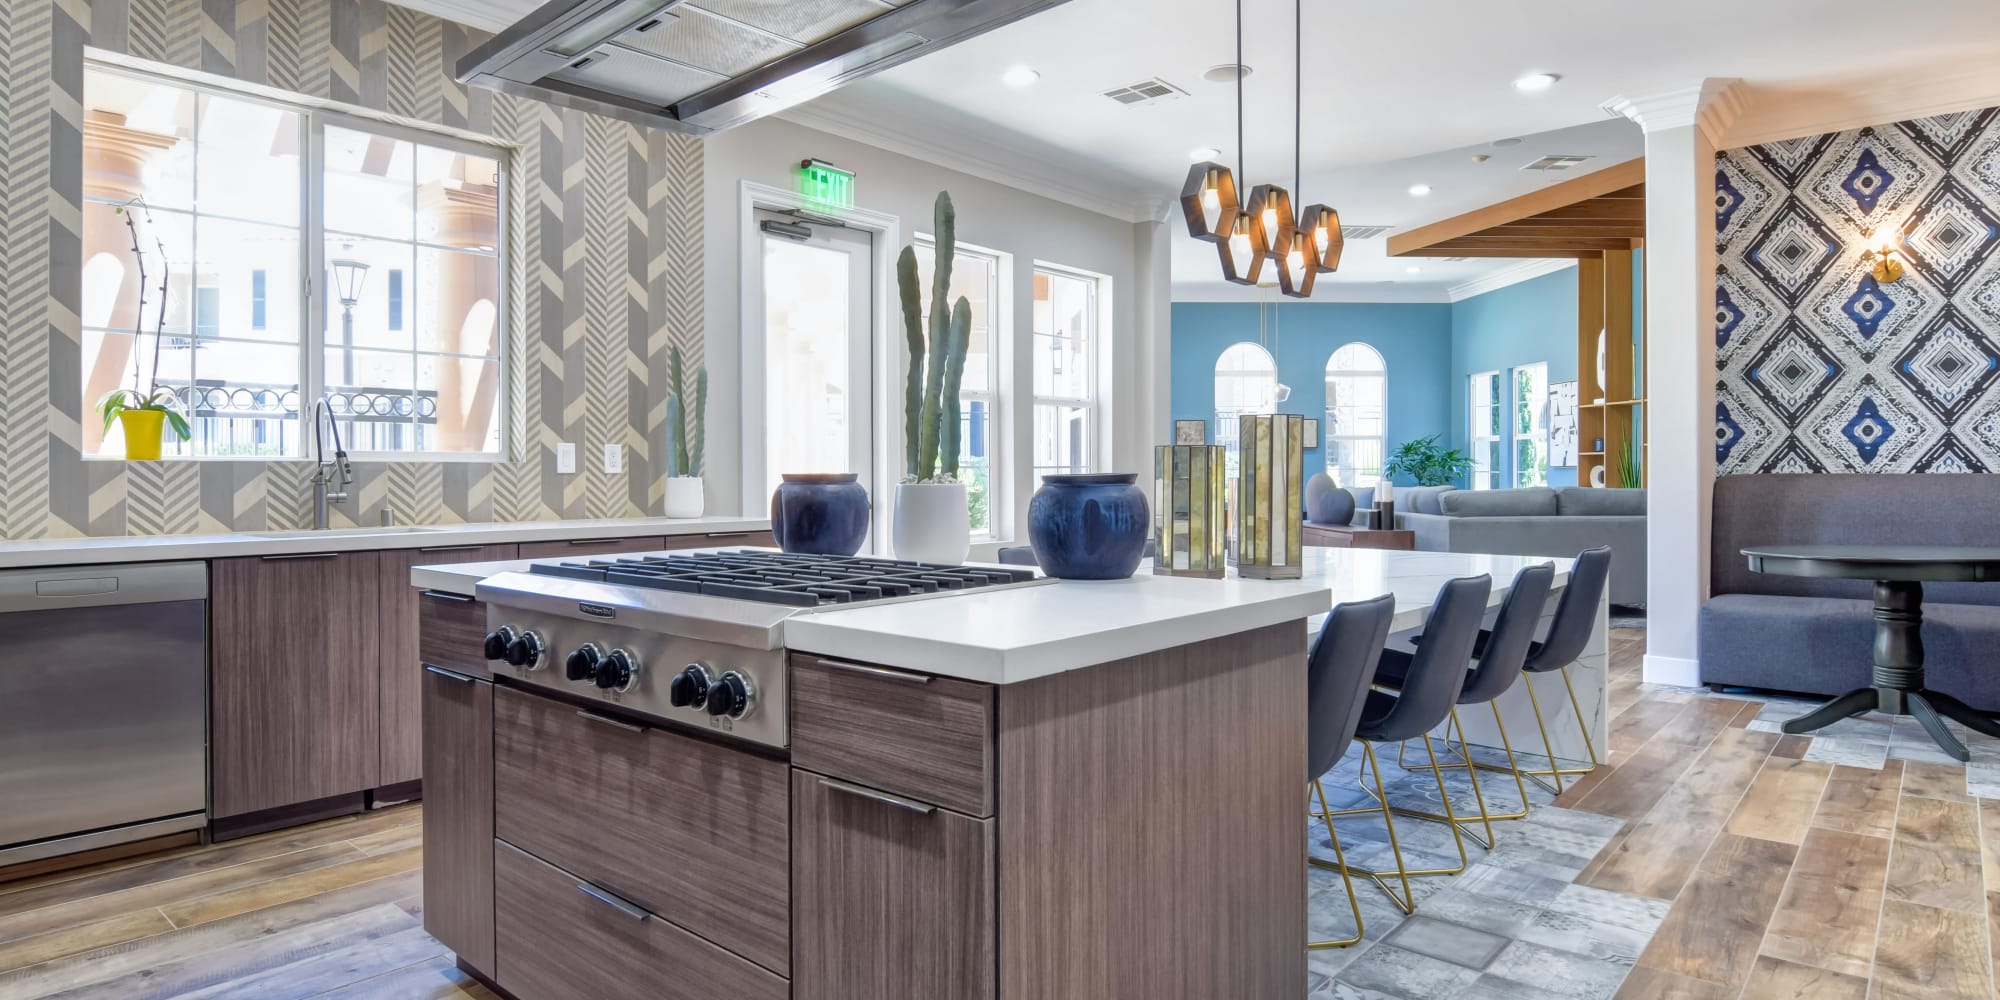 Demonstration kitchen for entertaining groups in the clubhouse at Sofi Shadowridge in Vista, California